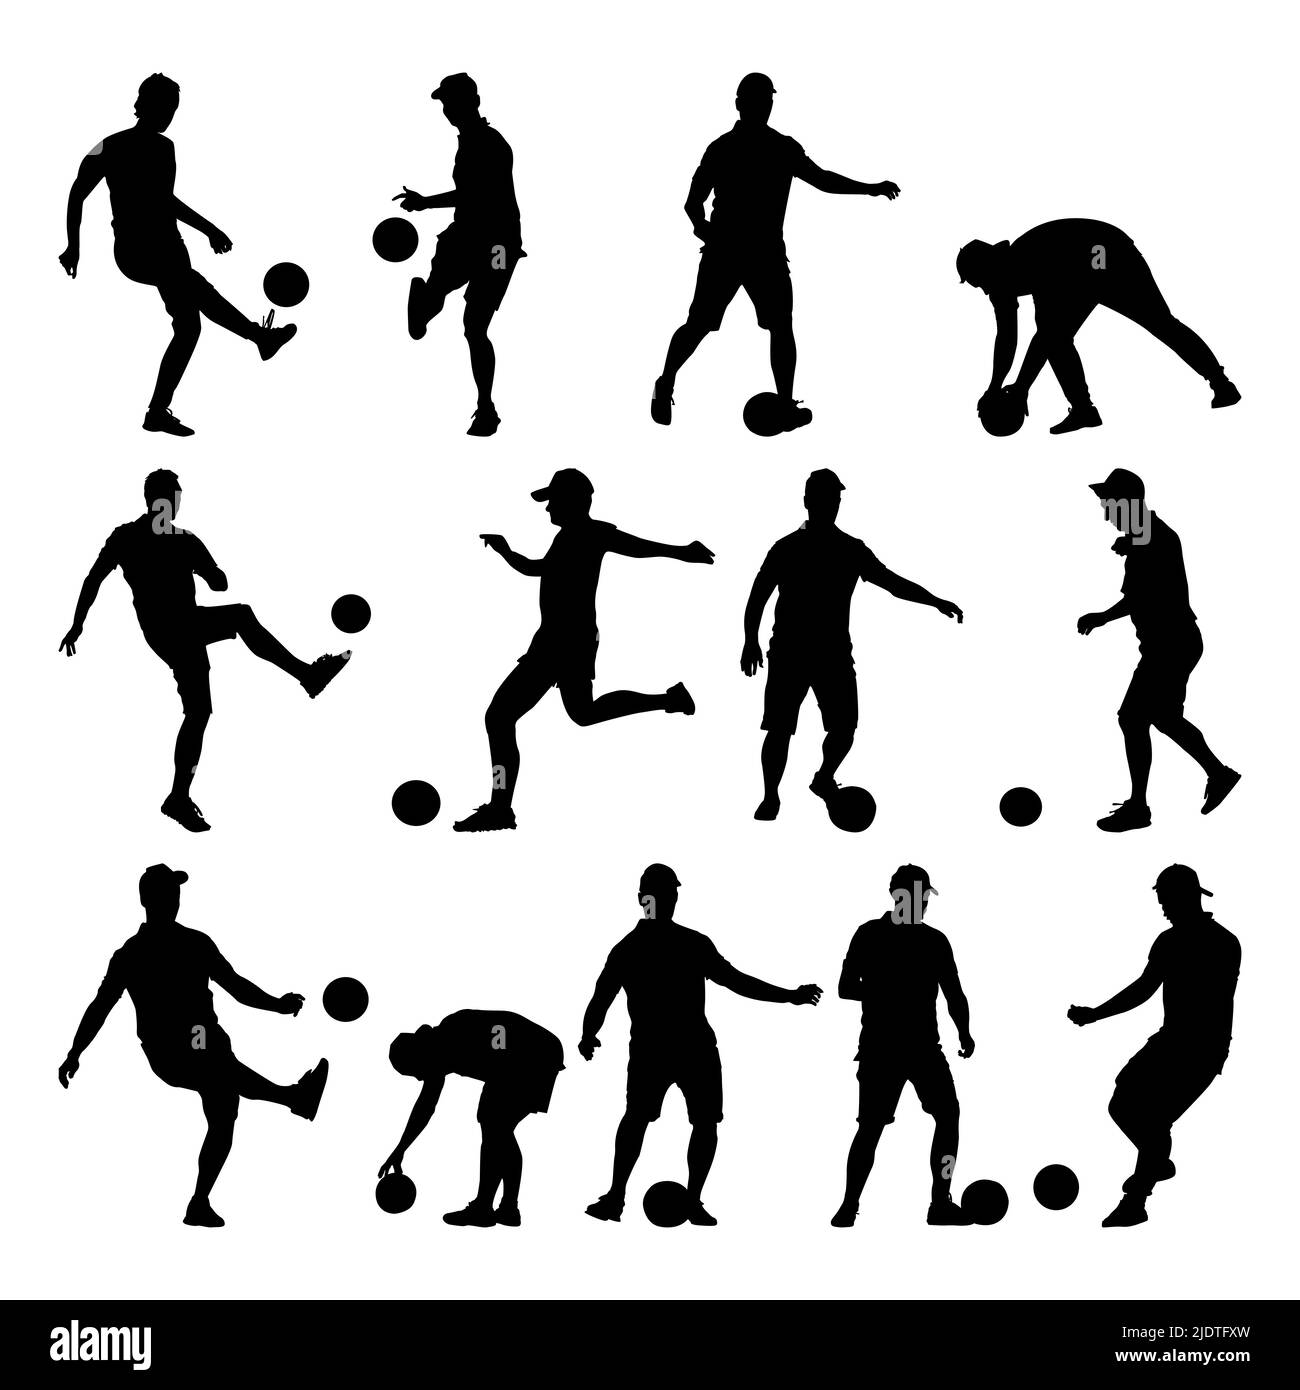 Set Of Soccer Players Silhouettes Group Of Footballers With Ball Of